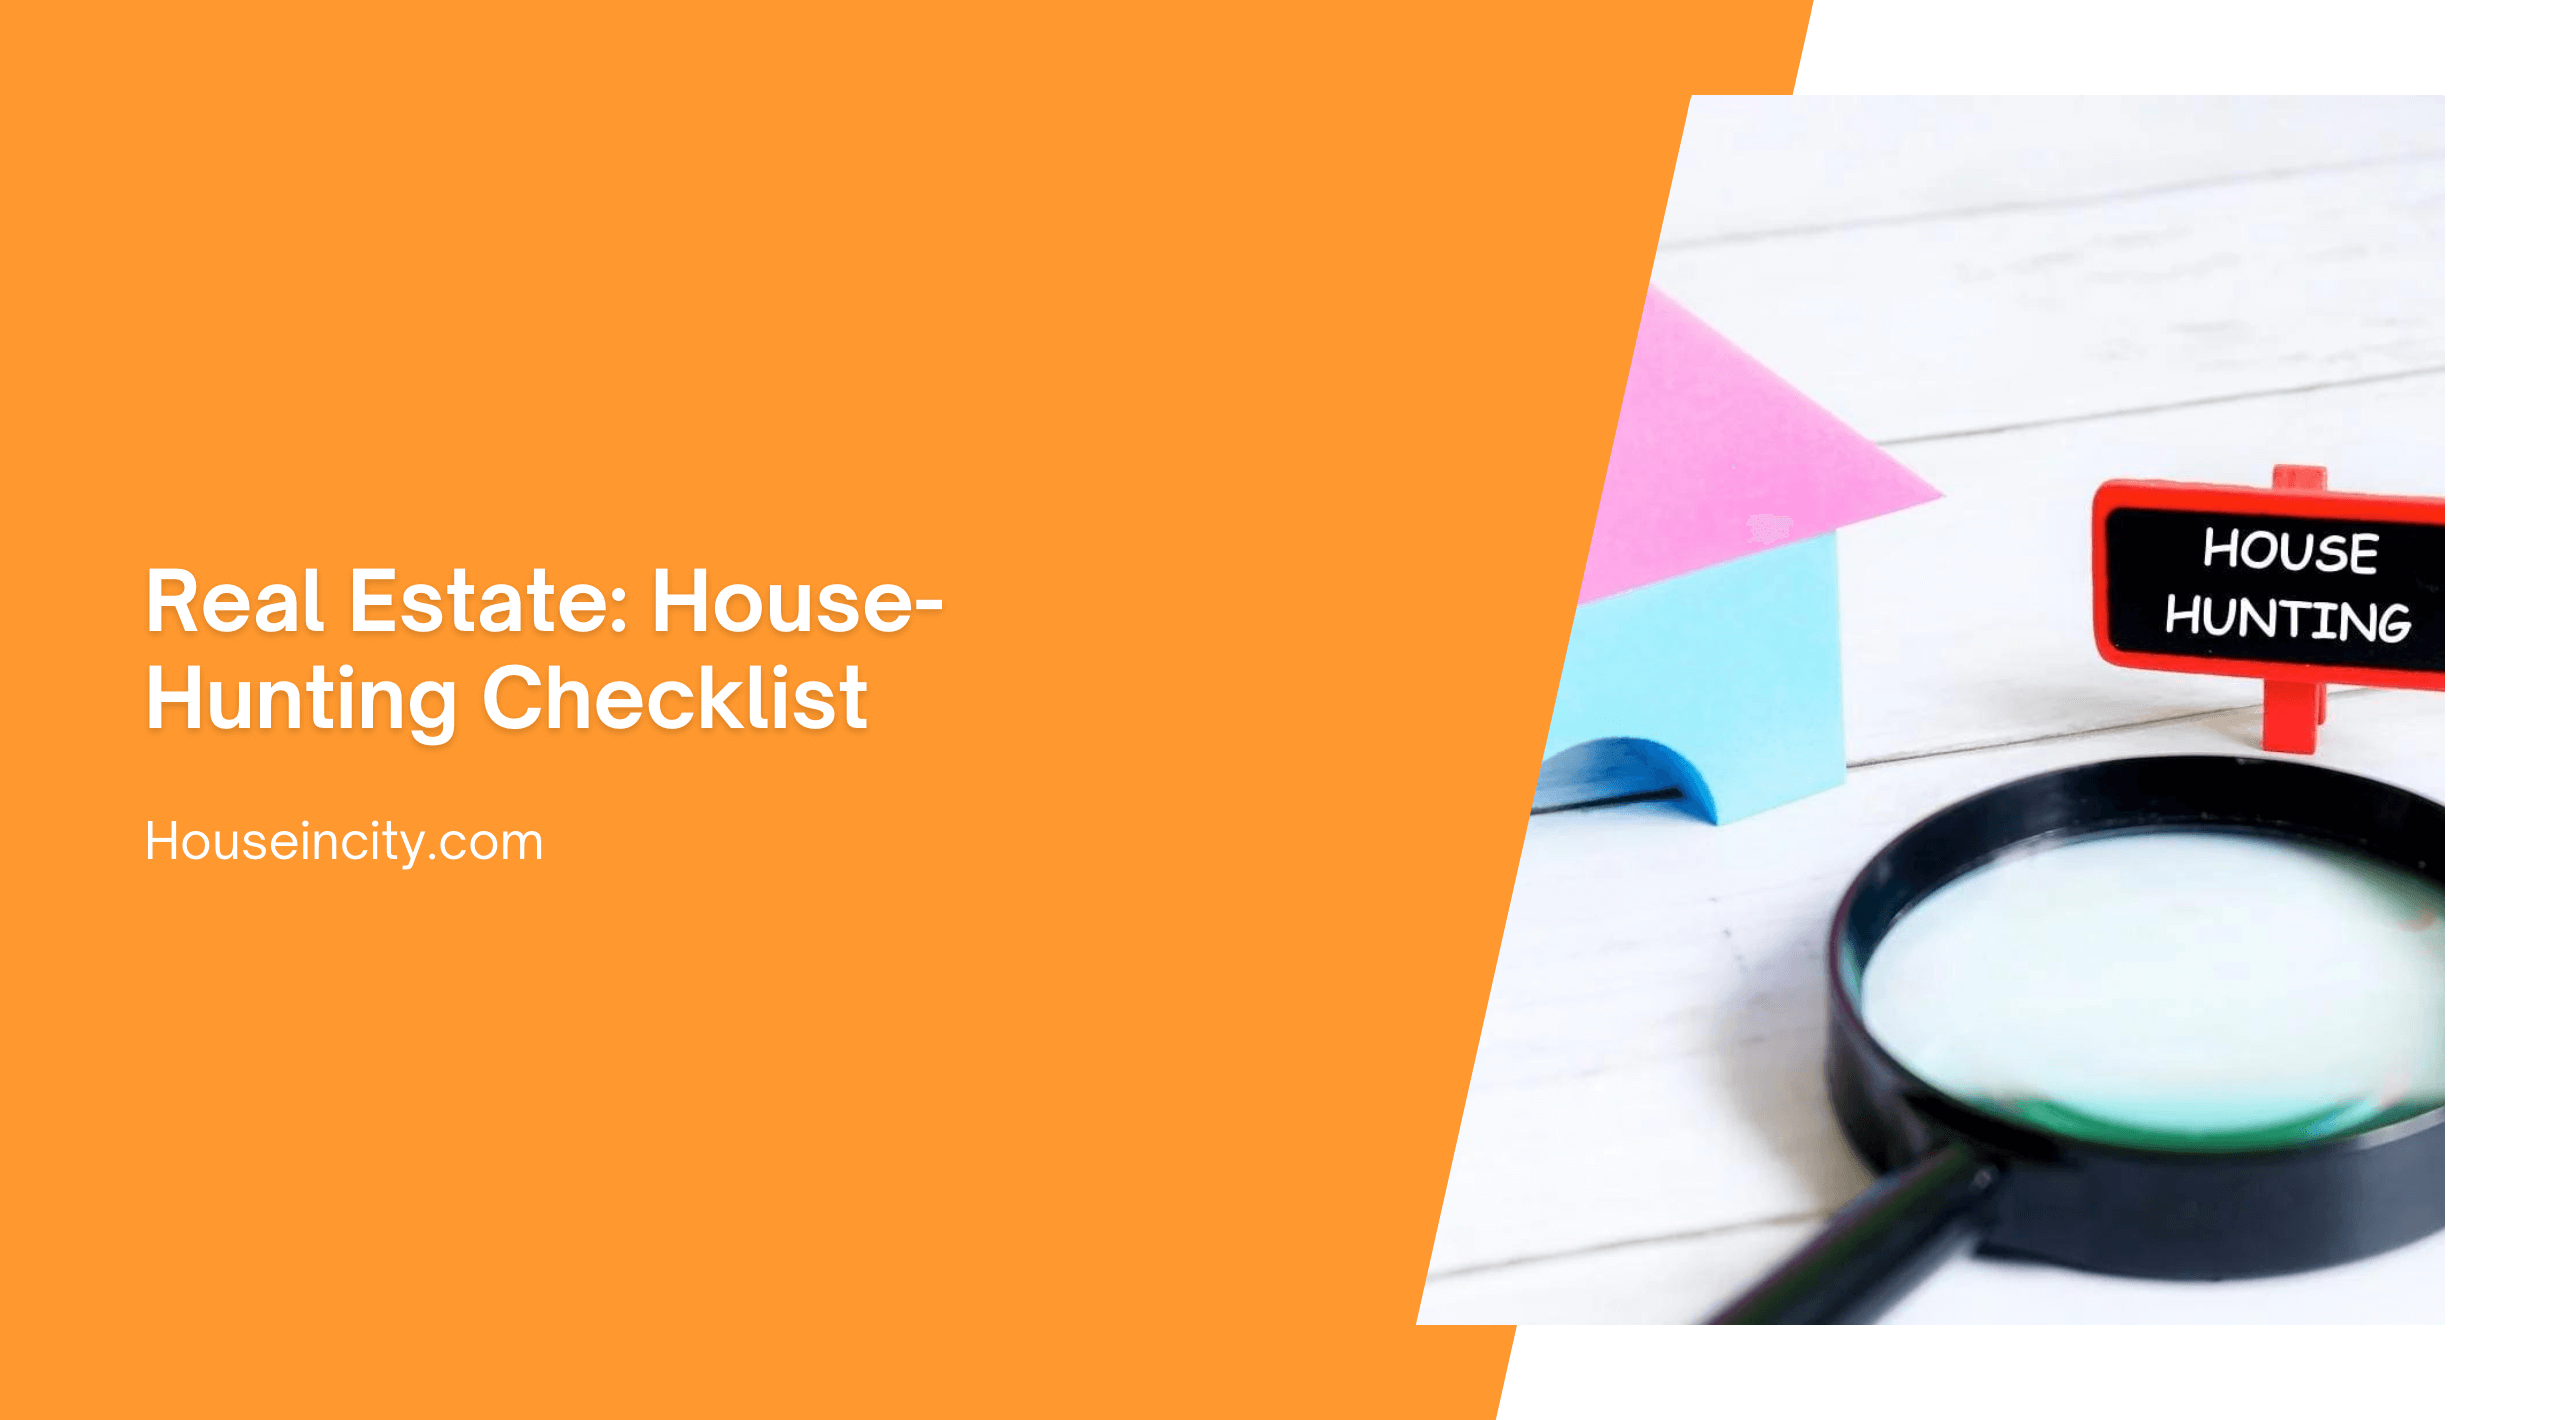 Real Estate: House-Hunting Checklist